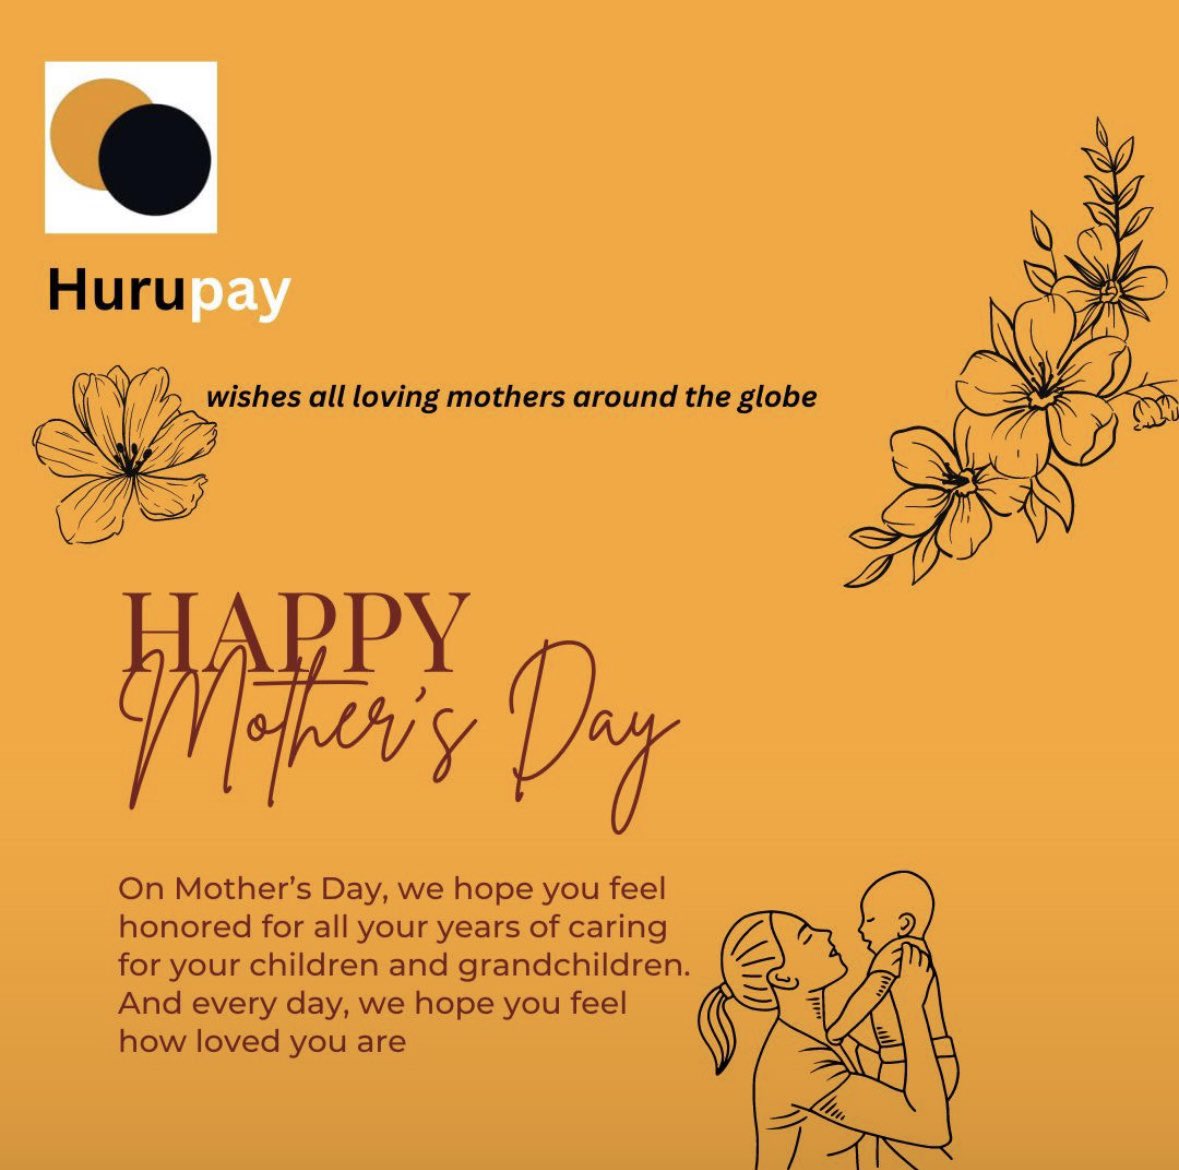 Celebrating the woman who does it all with love, grace, and endless strength. Happy Mother's Day!
#MothersDay #Heros